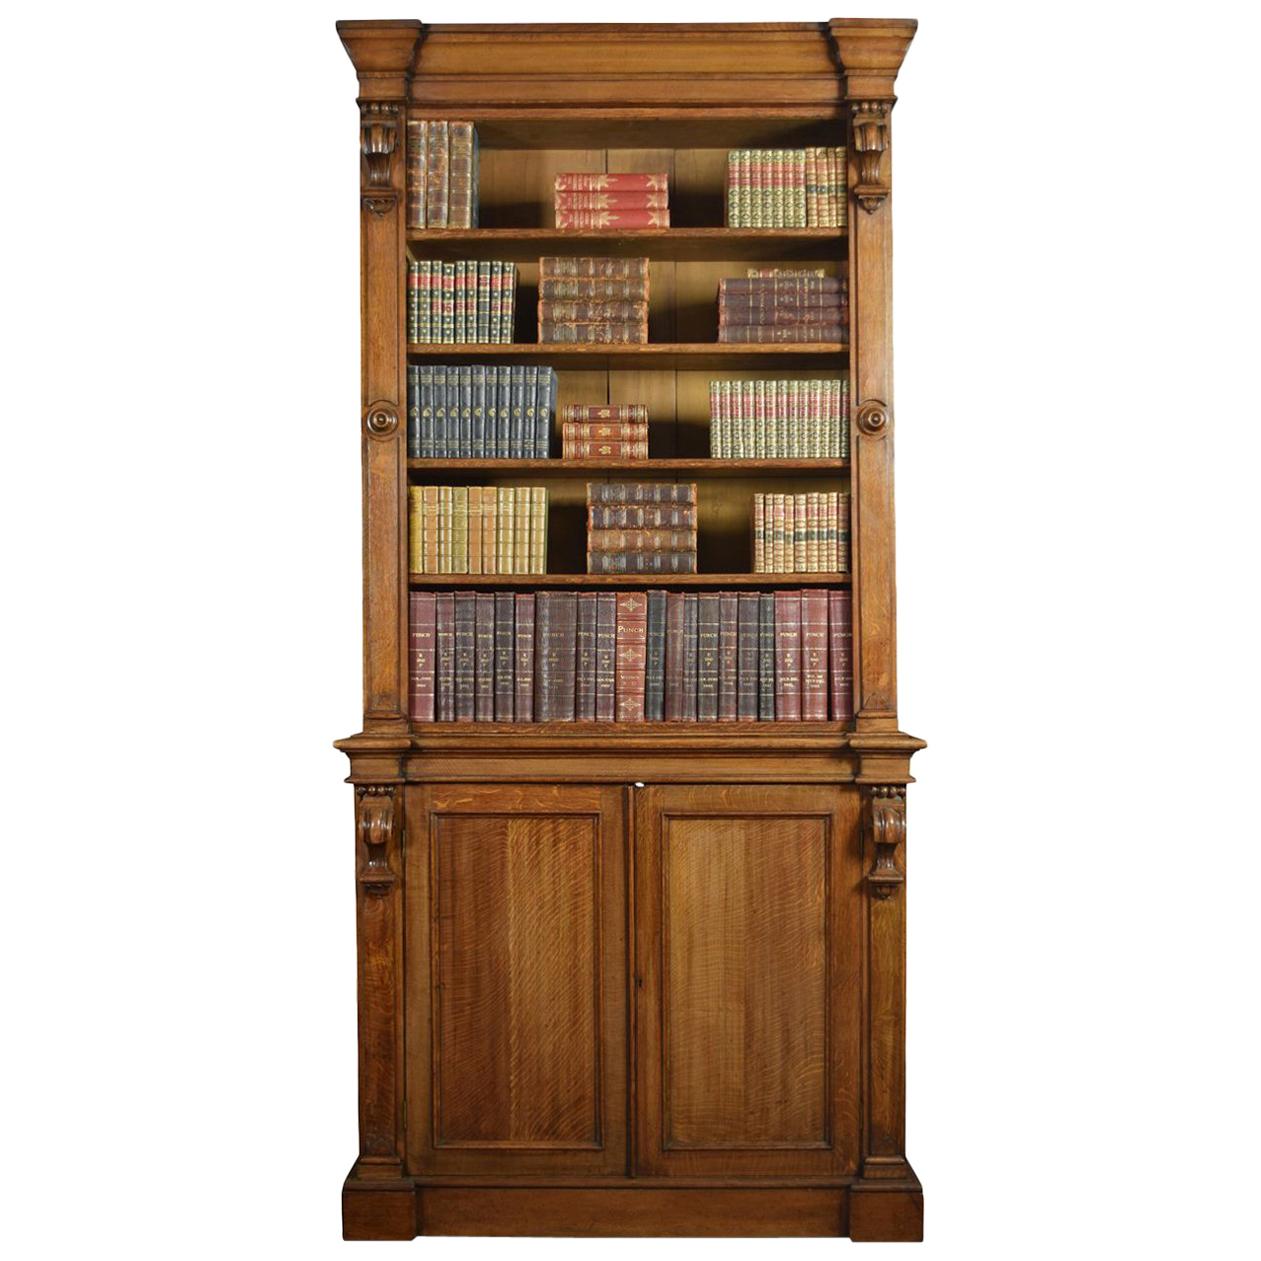 19th century oak bookcase with a flared cornice over a large open top bookcase with four adjustable shelves, the base section fitted with two panelled doors enclosing shelved interior. All raised up on plinth base
Dimensions:
Height 103.5